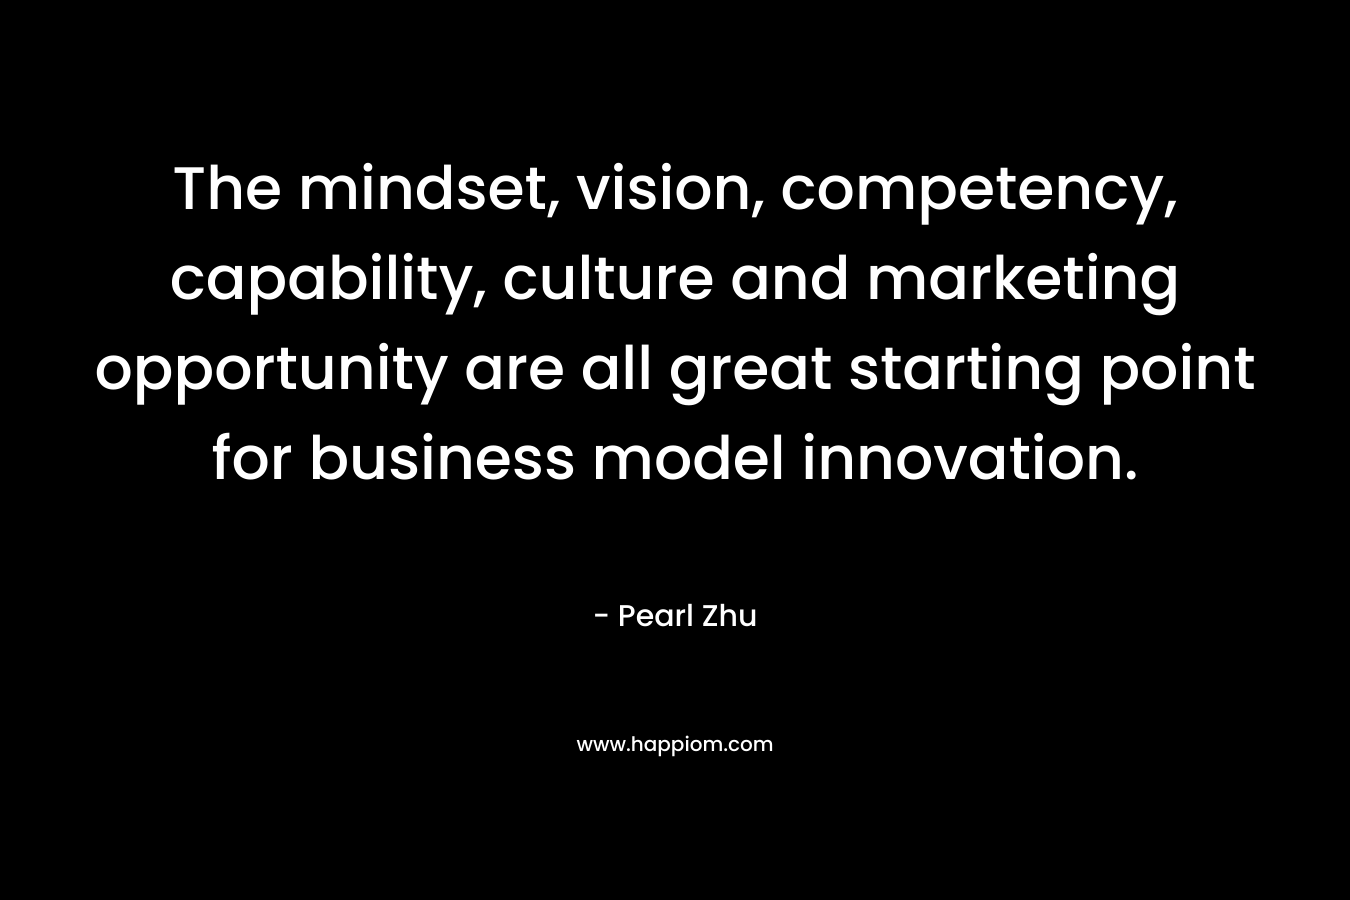 The mindset, vision, competency, capability, culture and marketing opportunity are all great starting point for business model innovation. – Pearl  Zhu